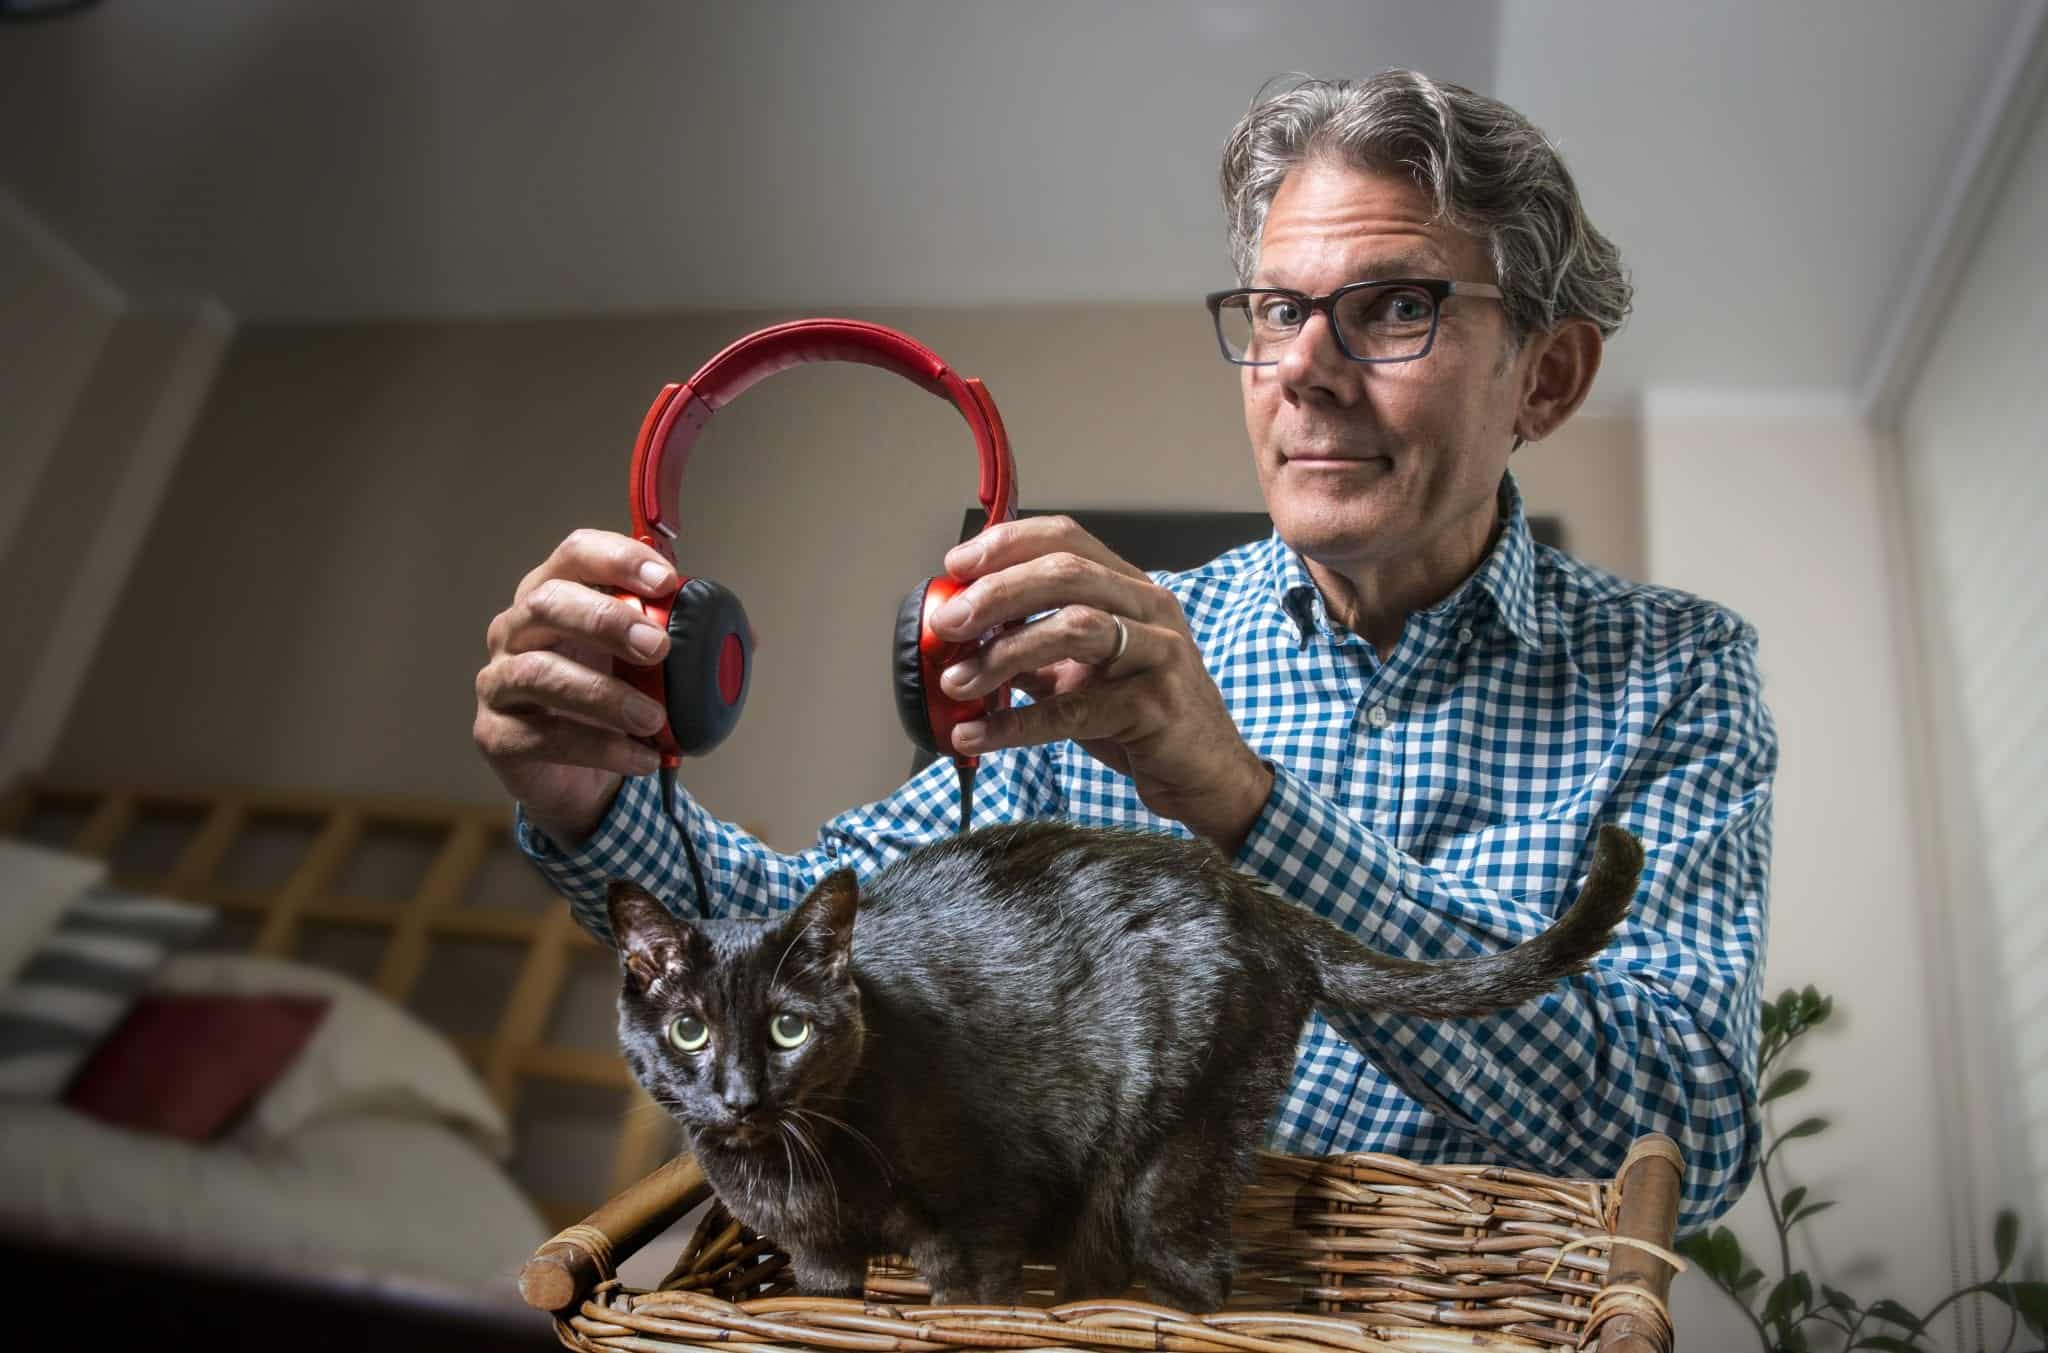 BETHESDA, MD - SEPTEMBER 25: Composite photo of David Teie, who is composing music for cats, in his apartment on September, 25, 2015 in Bethesda, MD. (Photo by Bill O'Leary/The Washington Post)